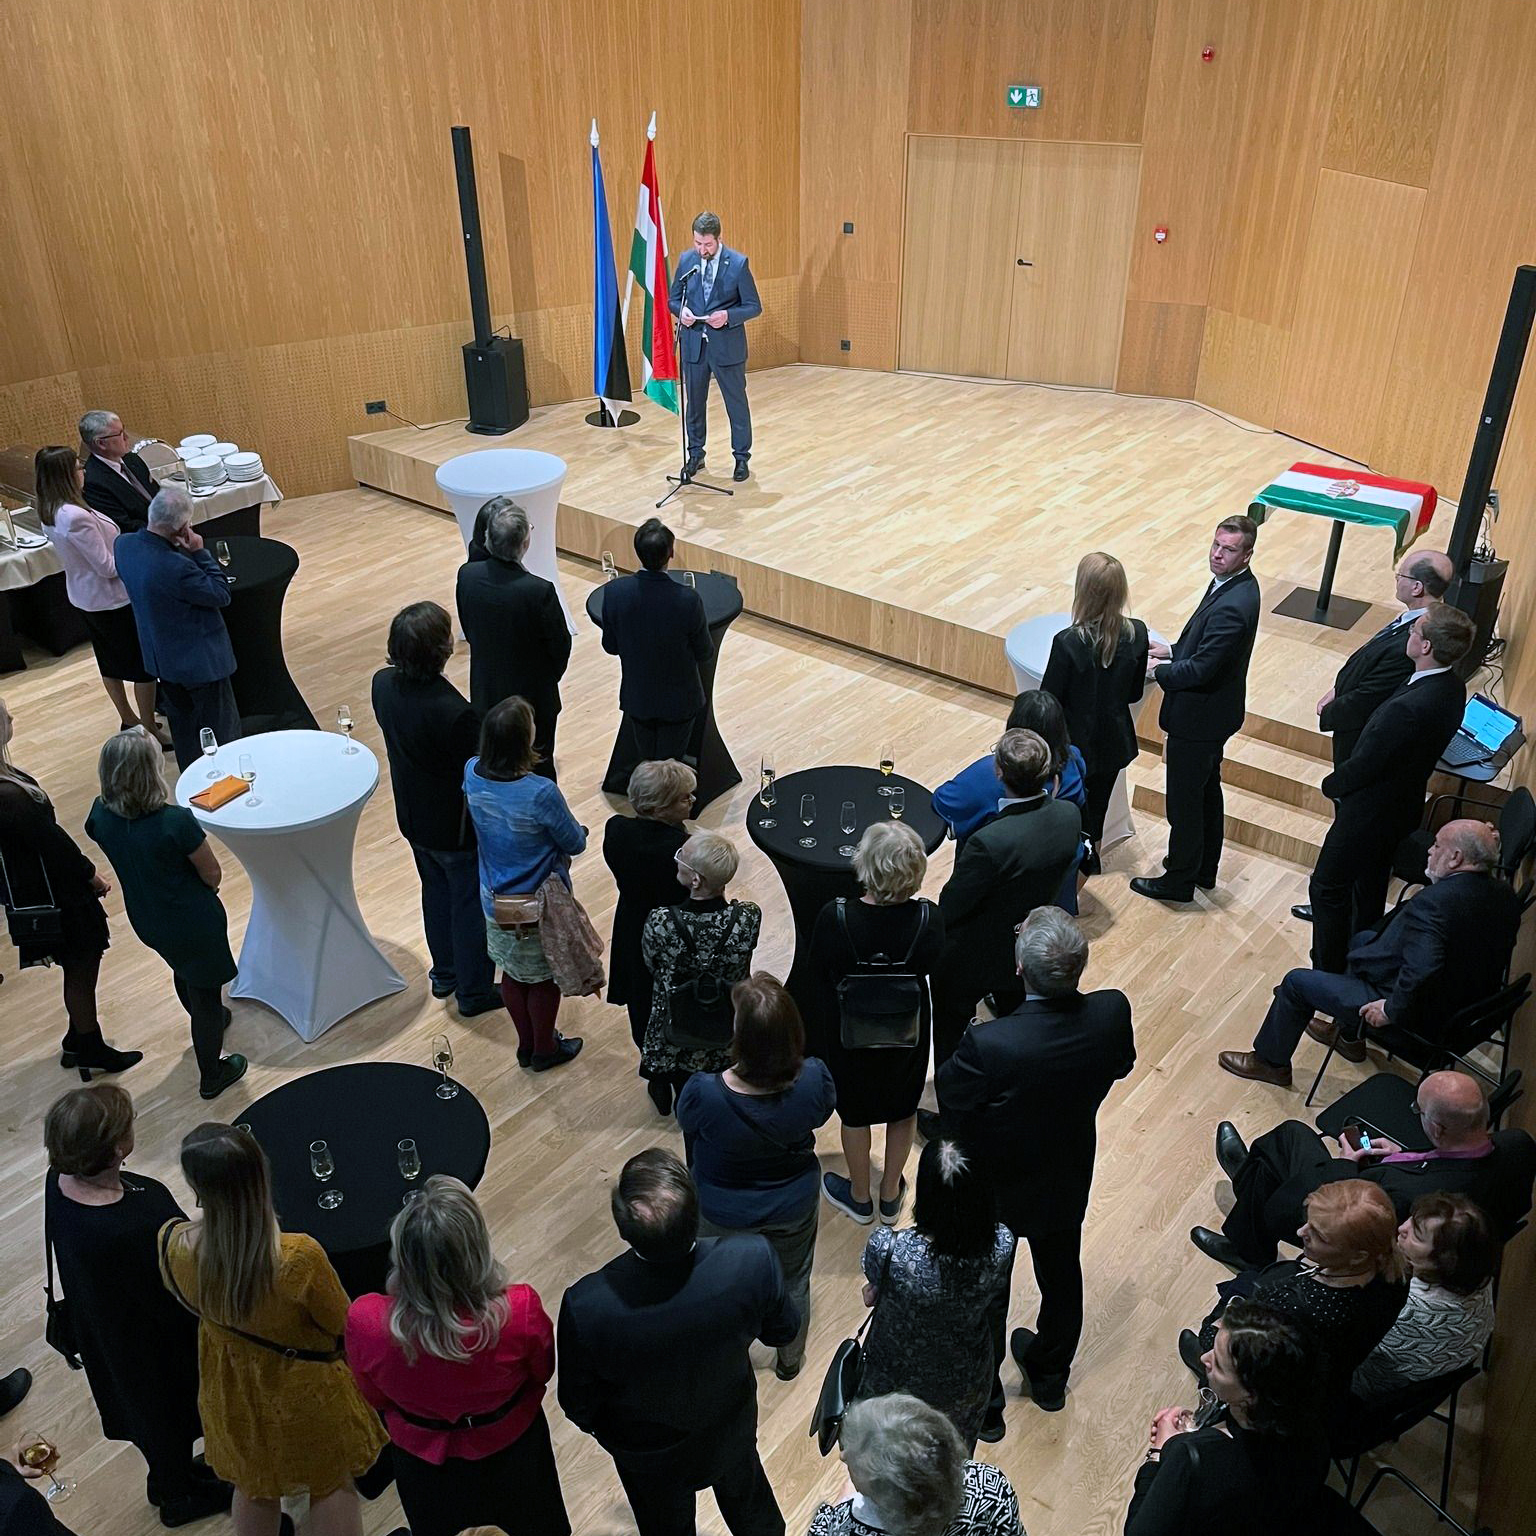 Reception of the Embassy of Hungary